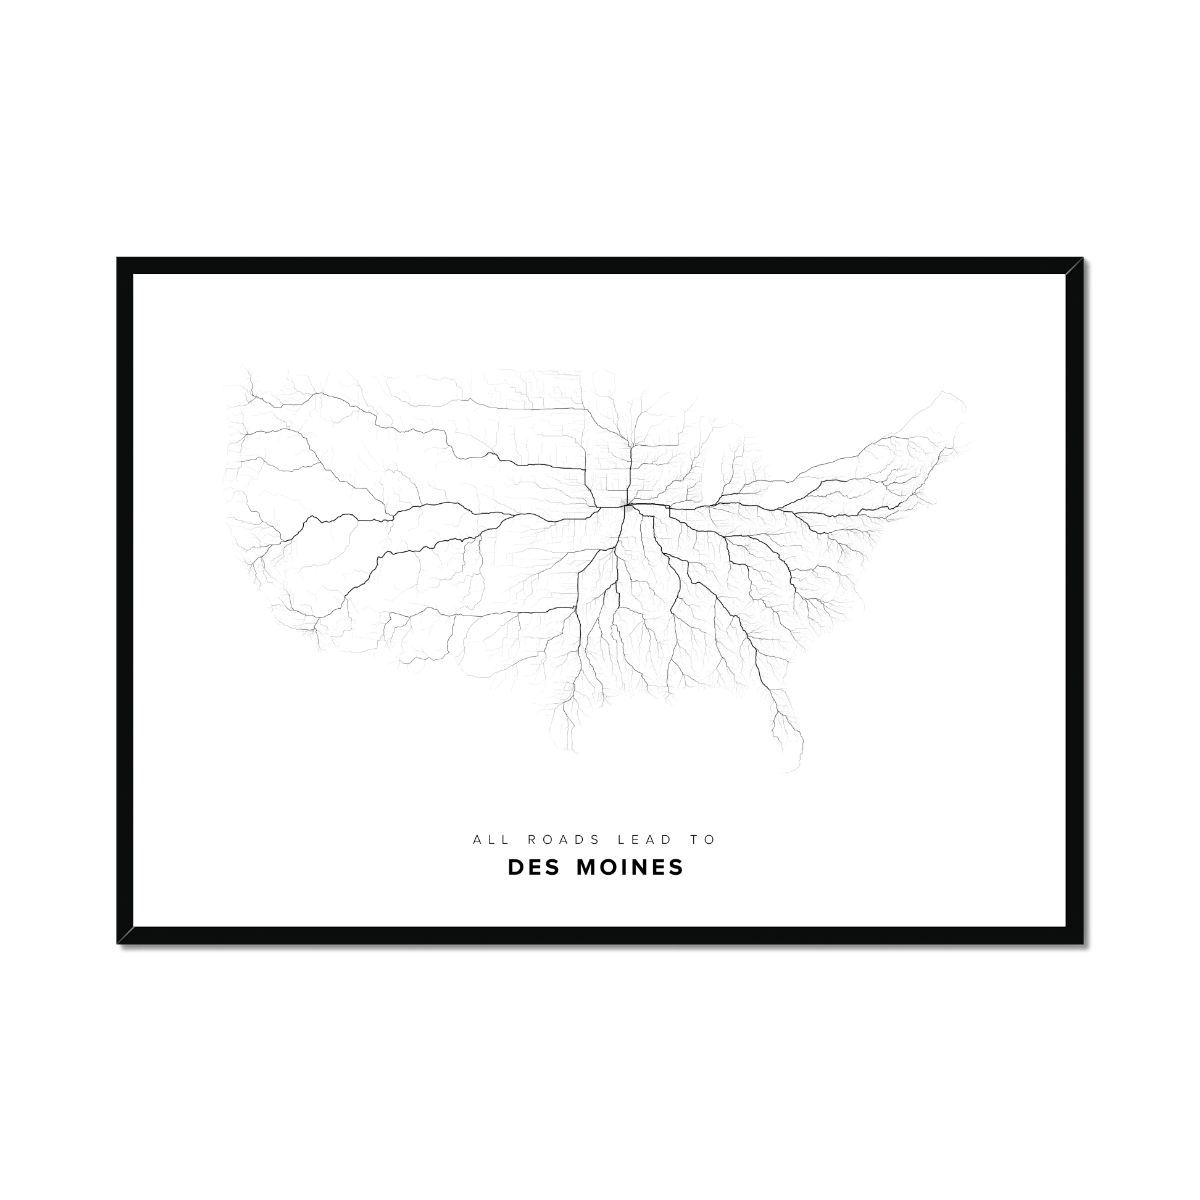 All roads lead to Des Moines (United States of America) Fine Art Map Print